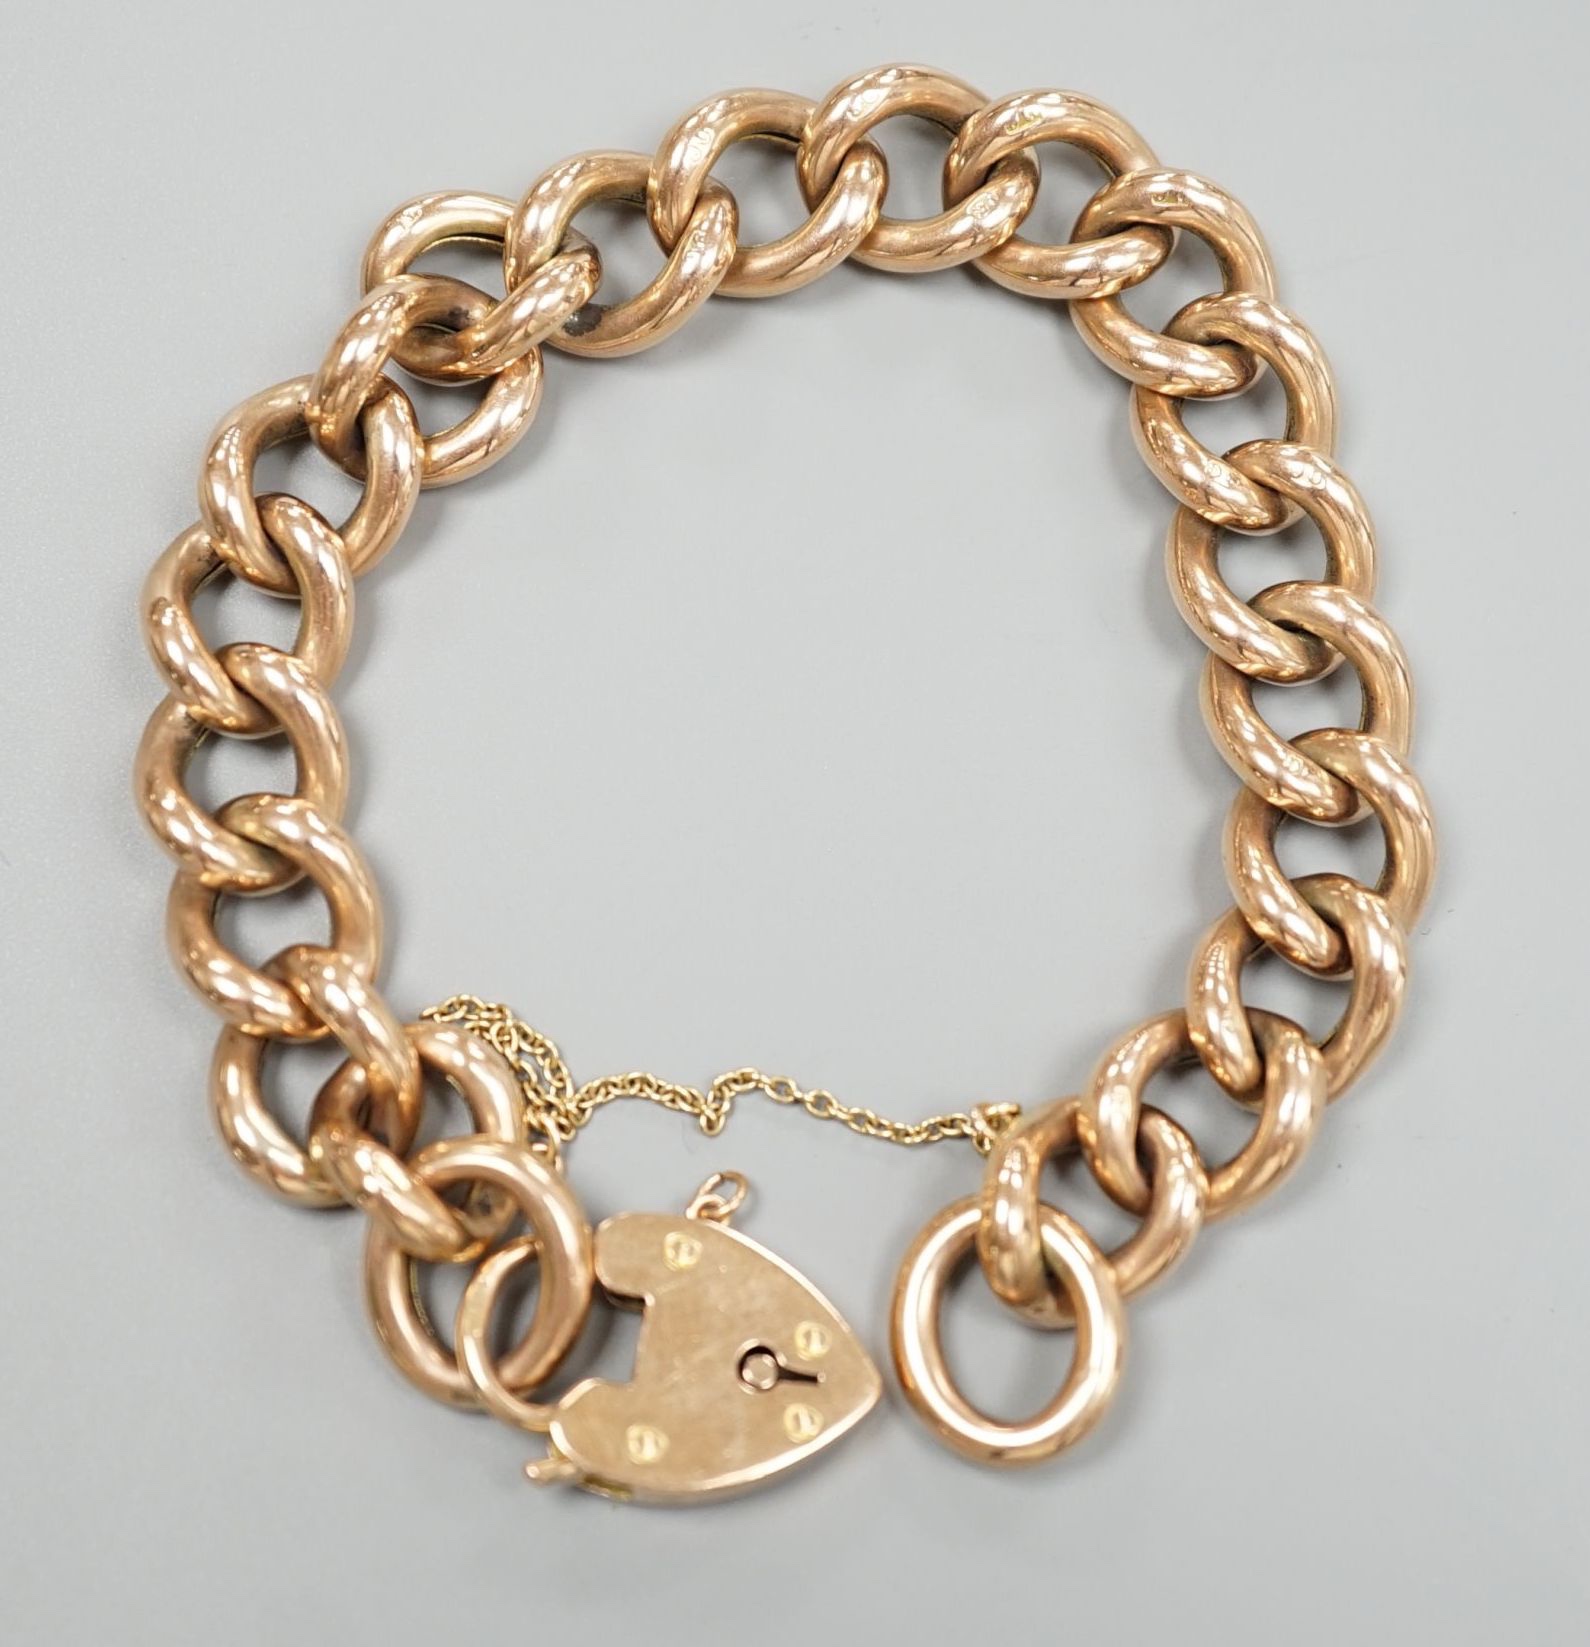 An Edwardian 9ct gold curblink bracelet, with heart shaped padlock clasp, approx. 19cm, 20.3 grams.